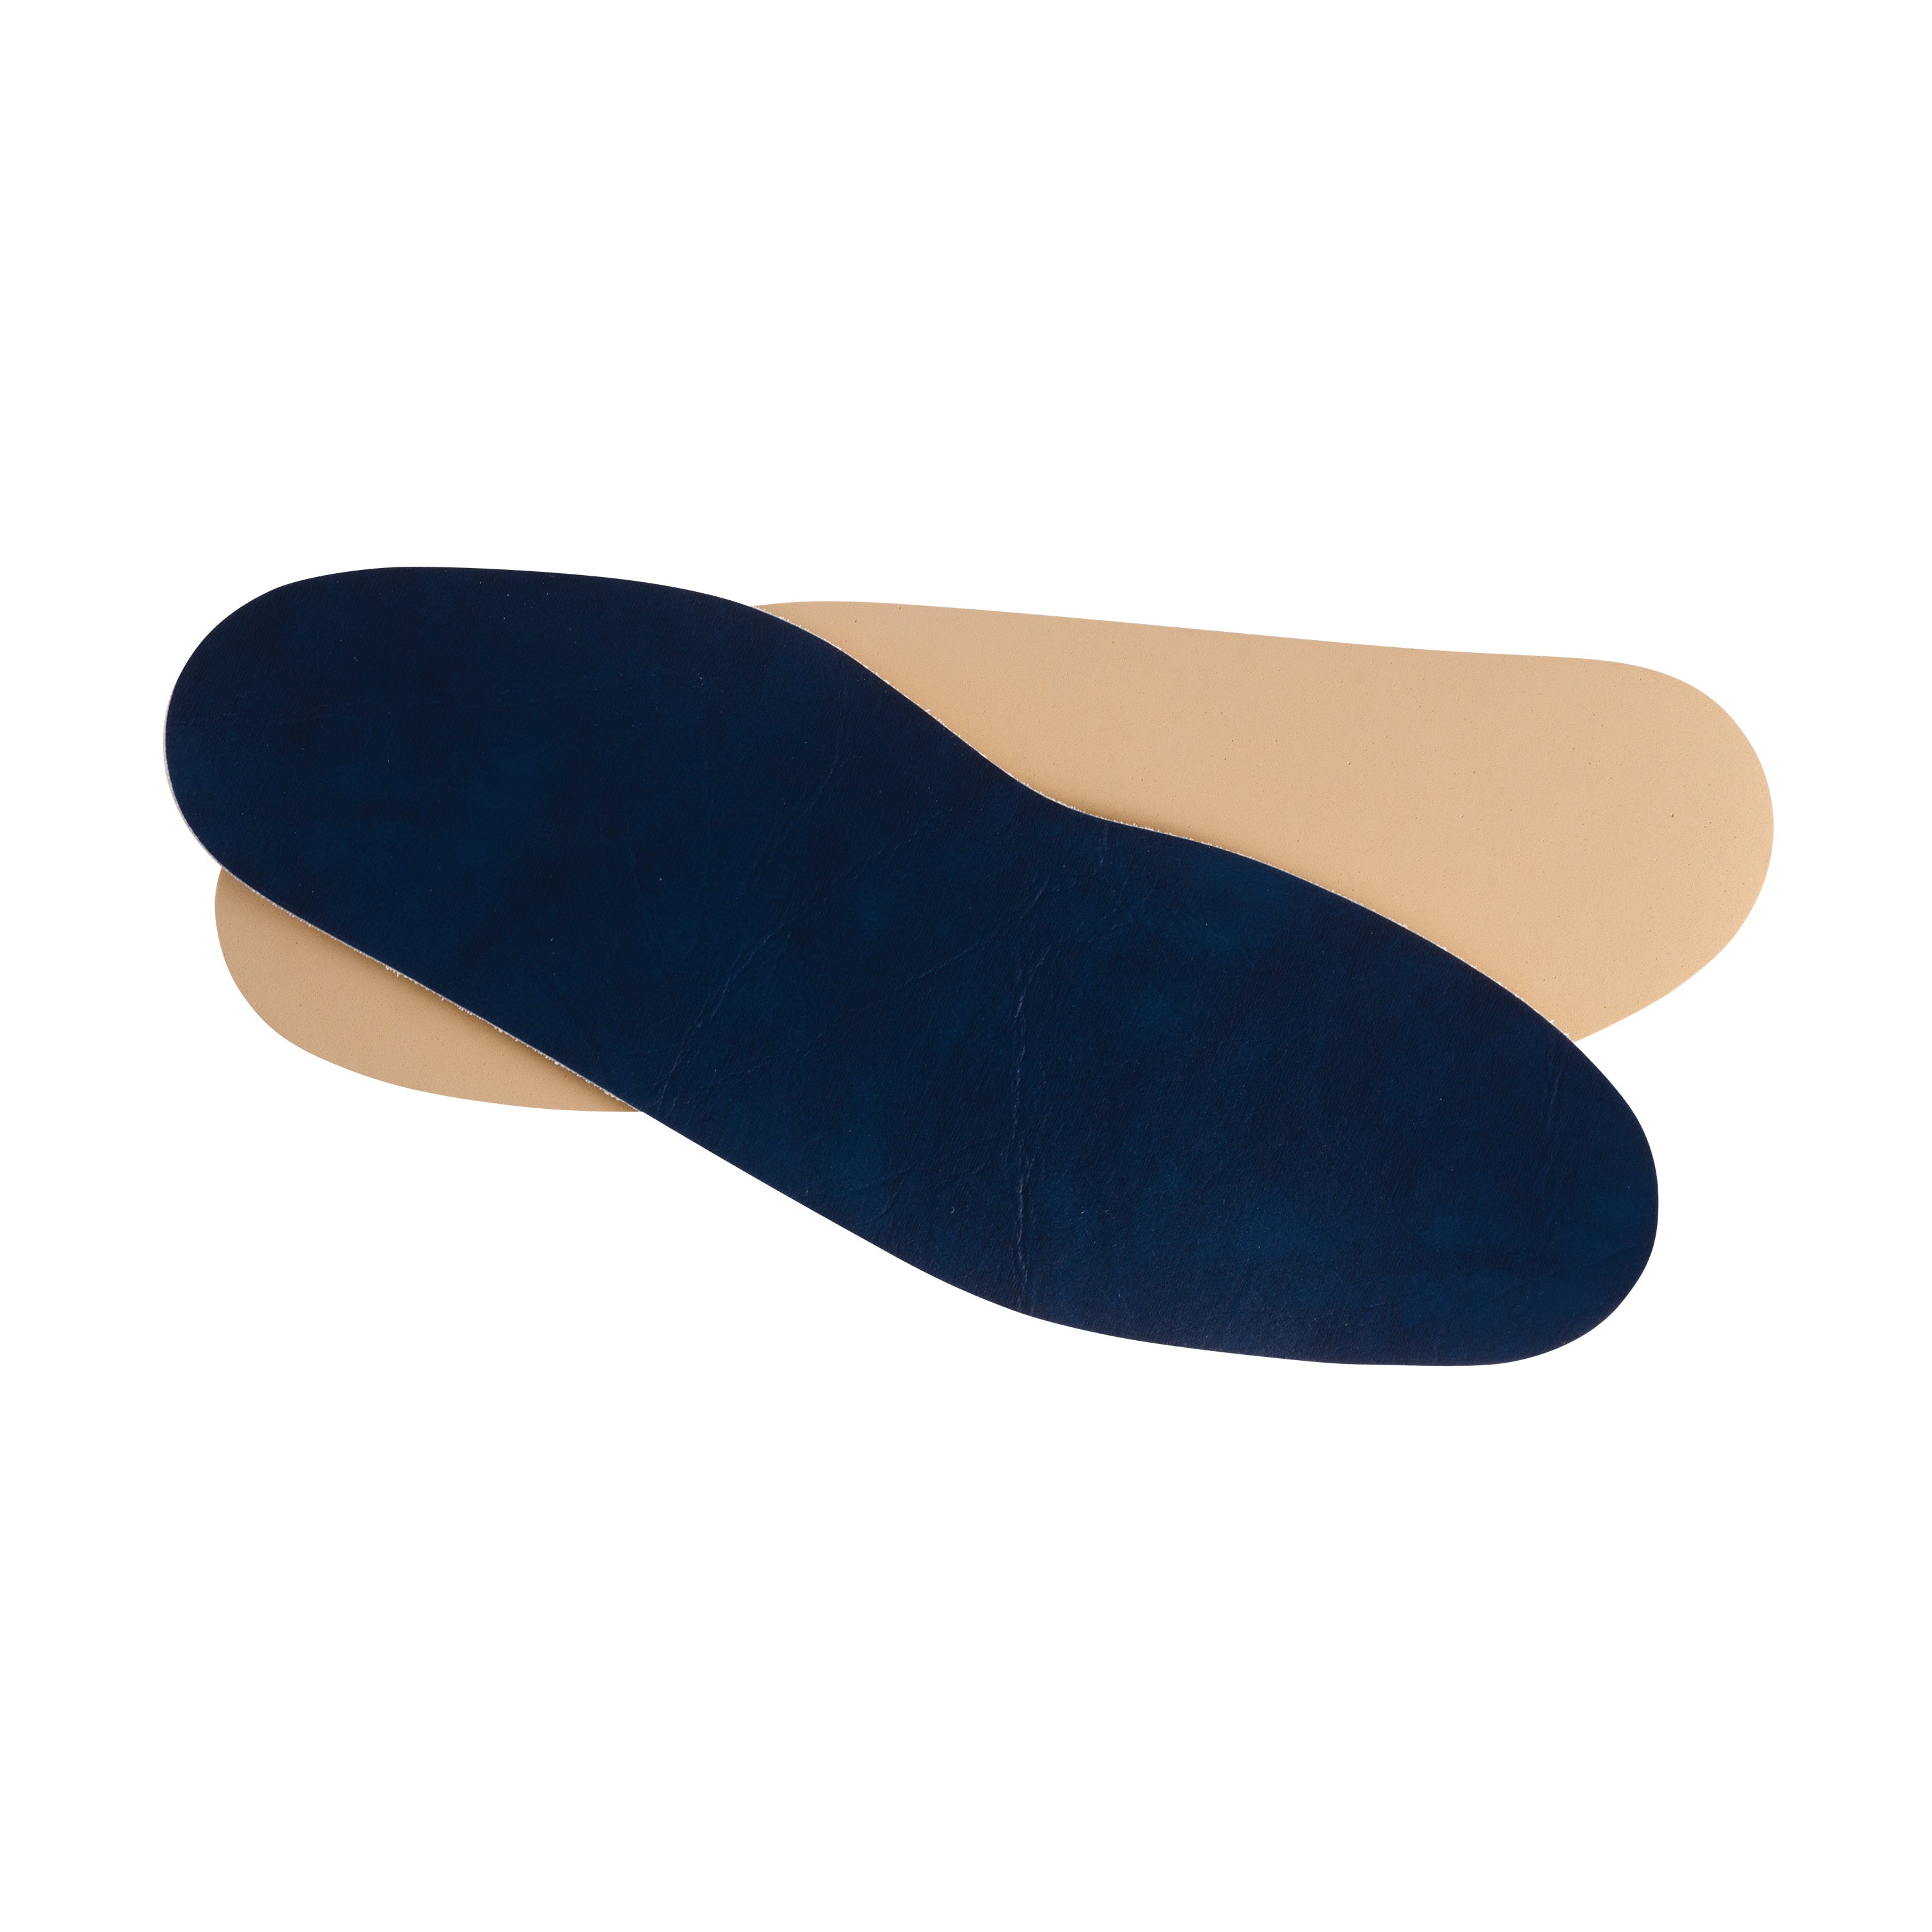 Stein's Sports Mold Insole with Flange, Blue, Men's Small AM-765-5284-0000